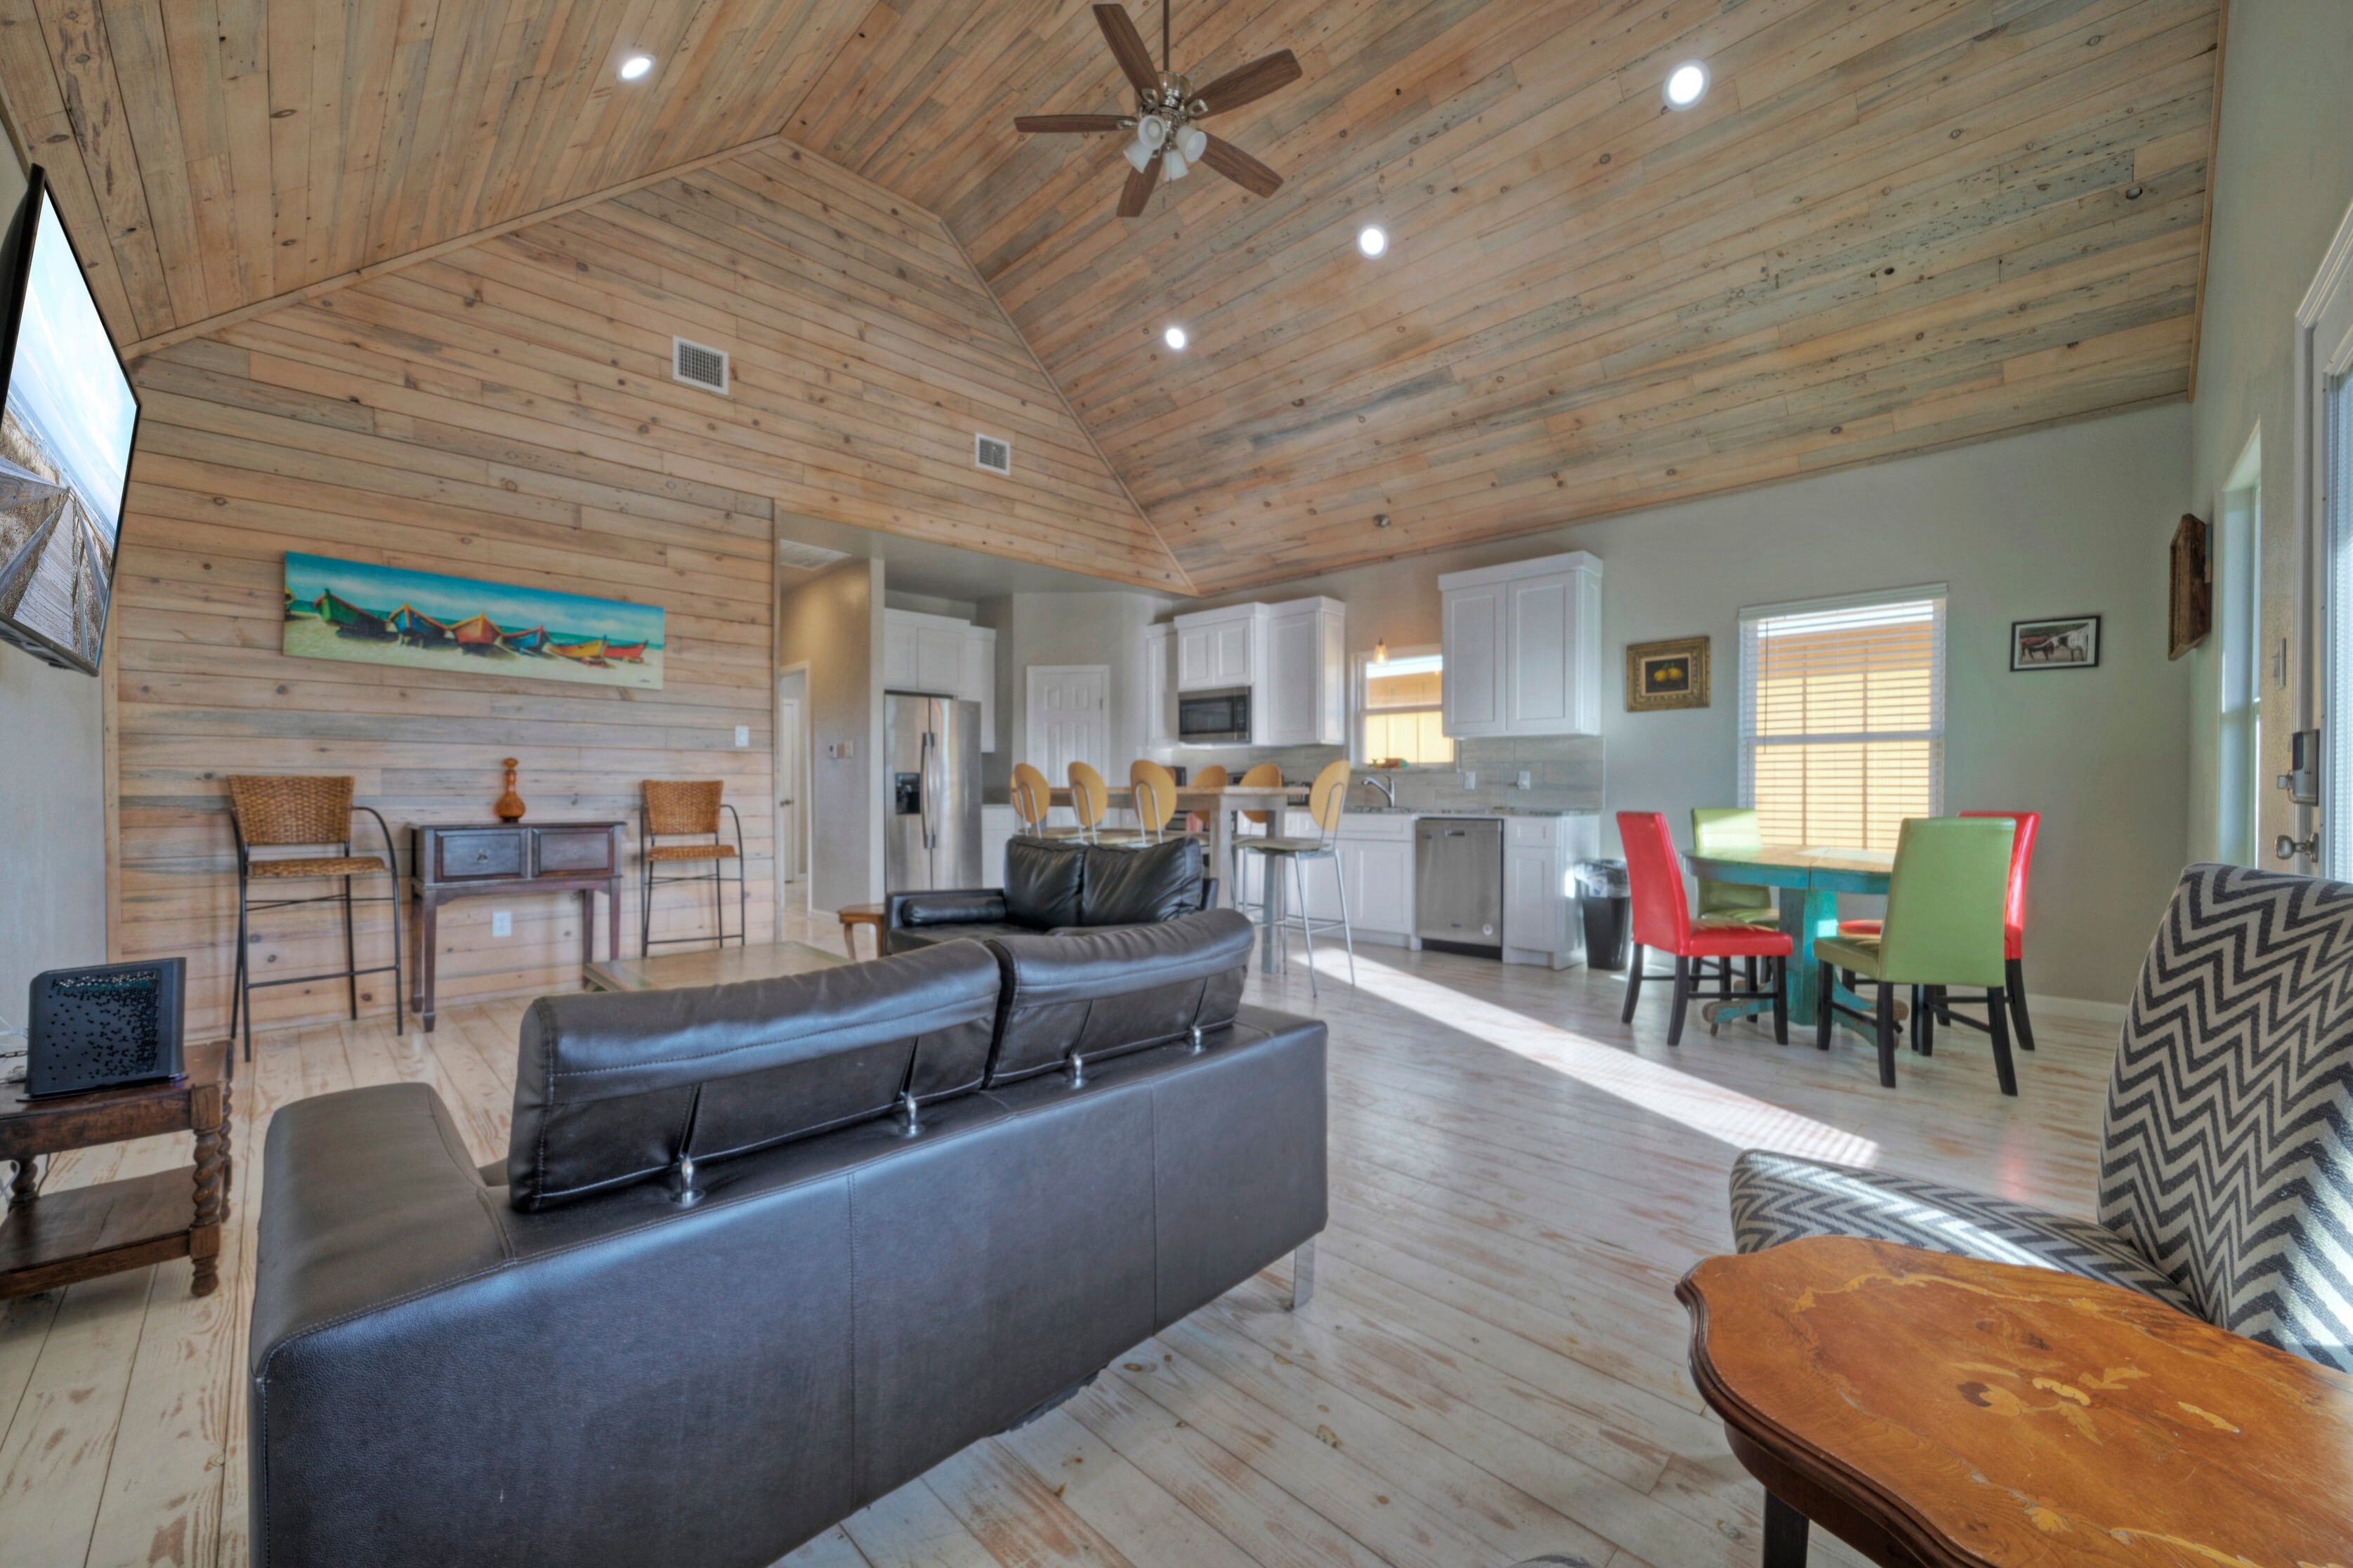 Gather with your guests in the open floor plan.